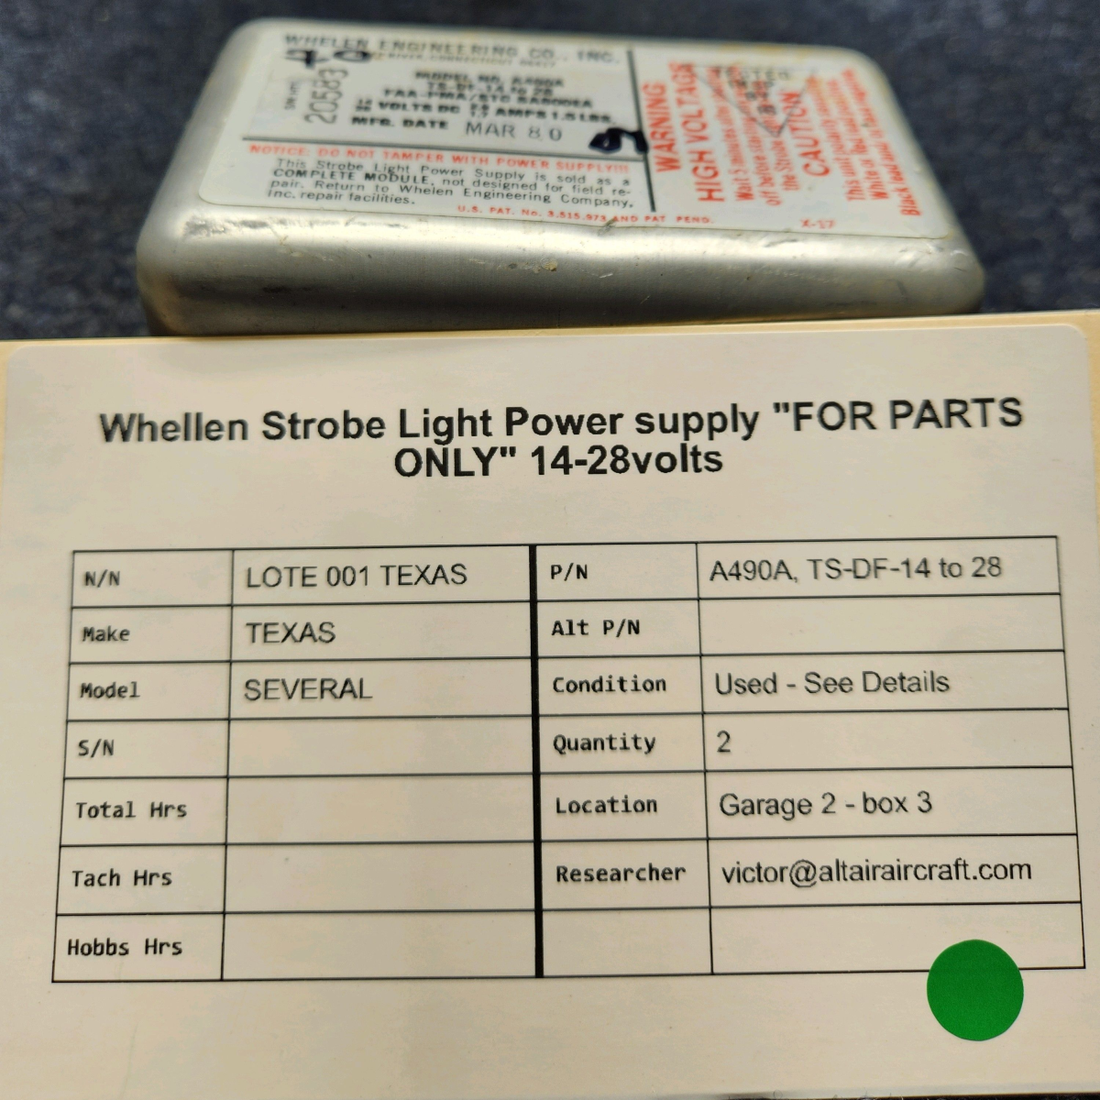 Used aircraft parts for sale, A490A, TS-DF-14 to 28 Whelen Strobe Power Supply WHELLEN STROBE LIGHT POWER SUPPLY "FOR PARTS ONLY" 14-28VOLTS